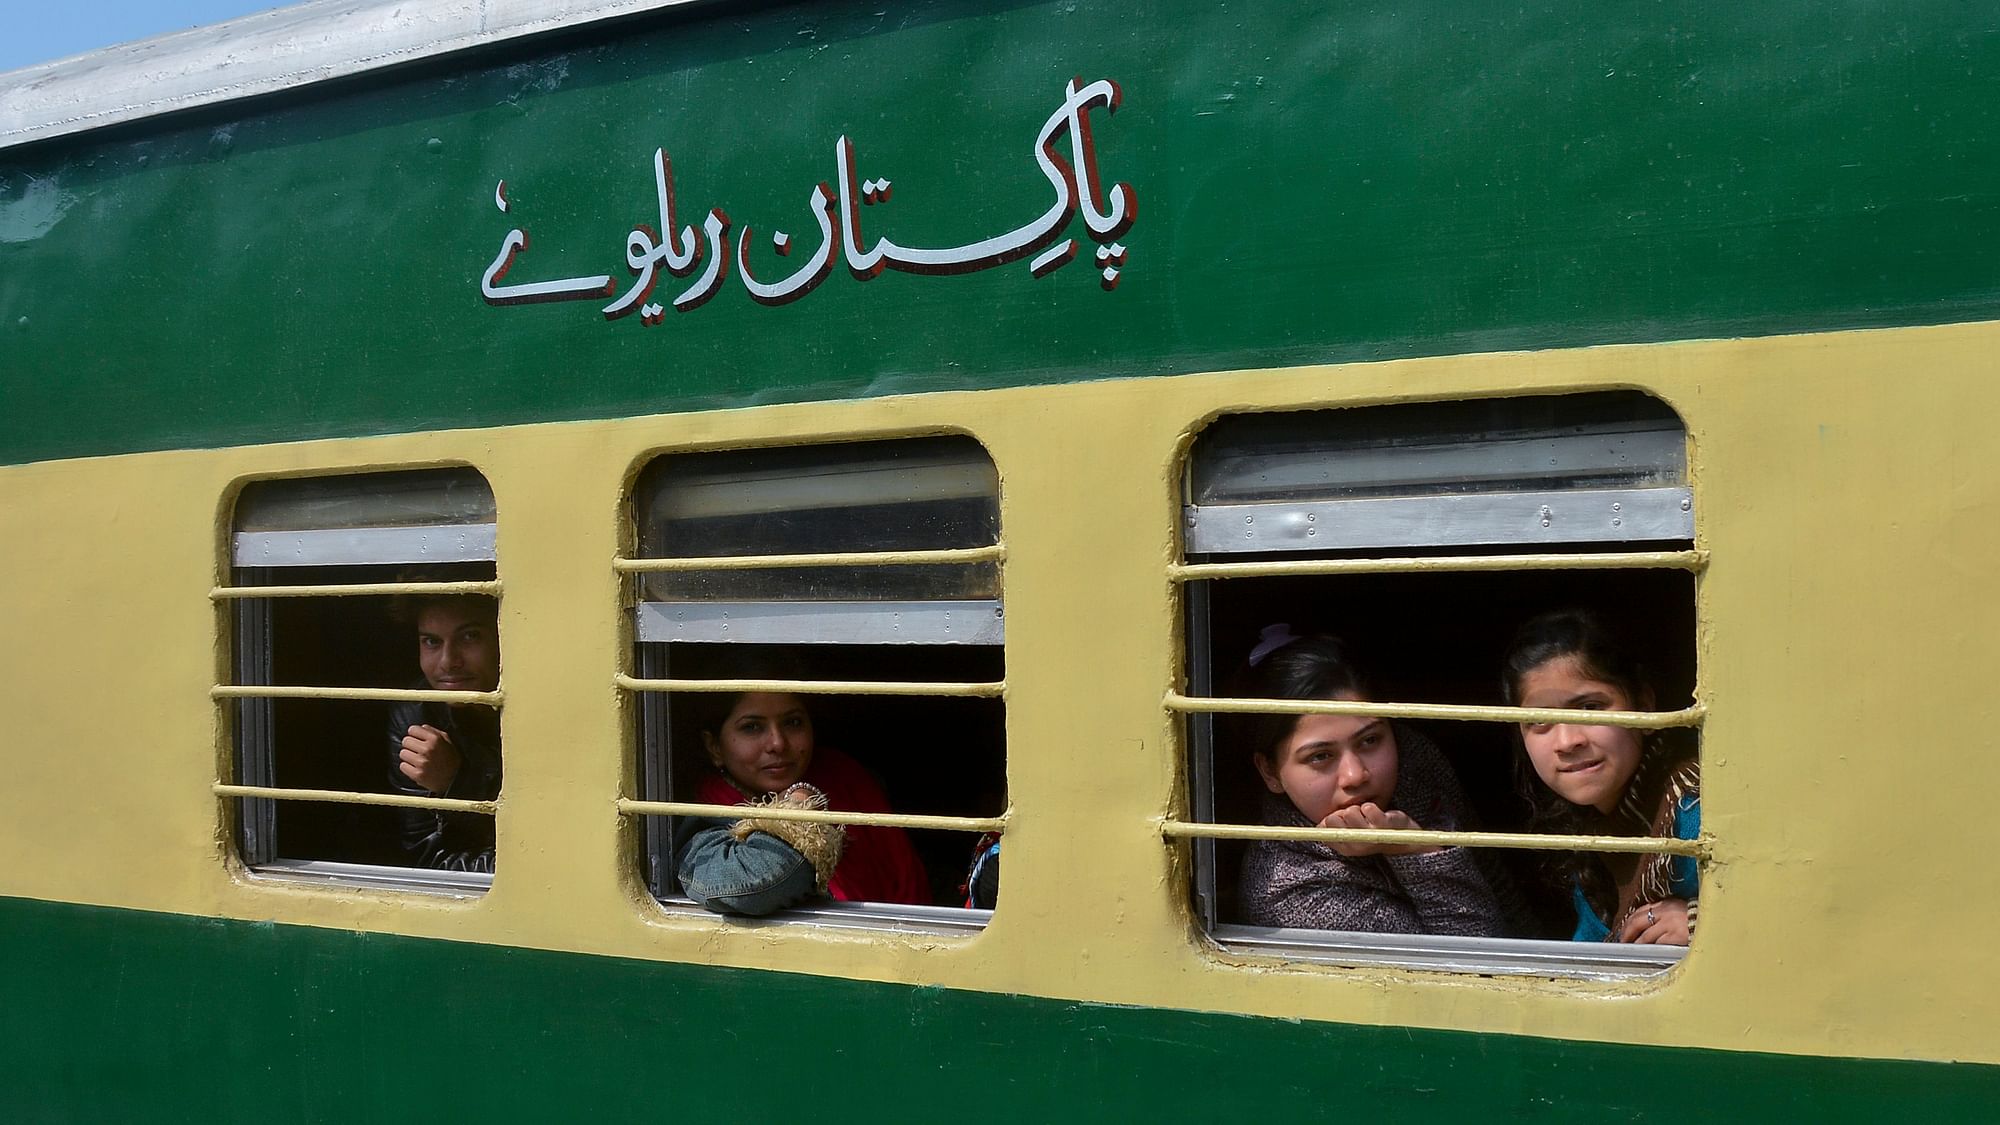 Samjhauta Express between India and Pakistan reopened in another sign of easing tensions.